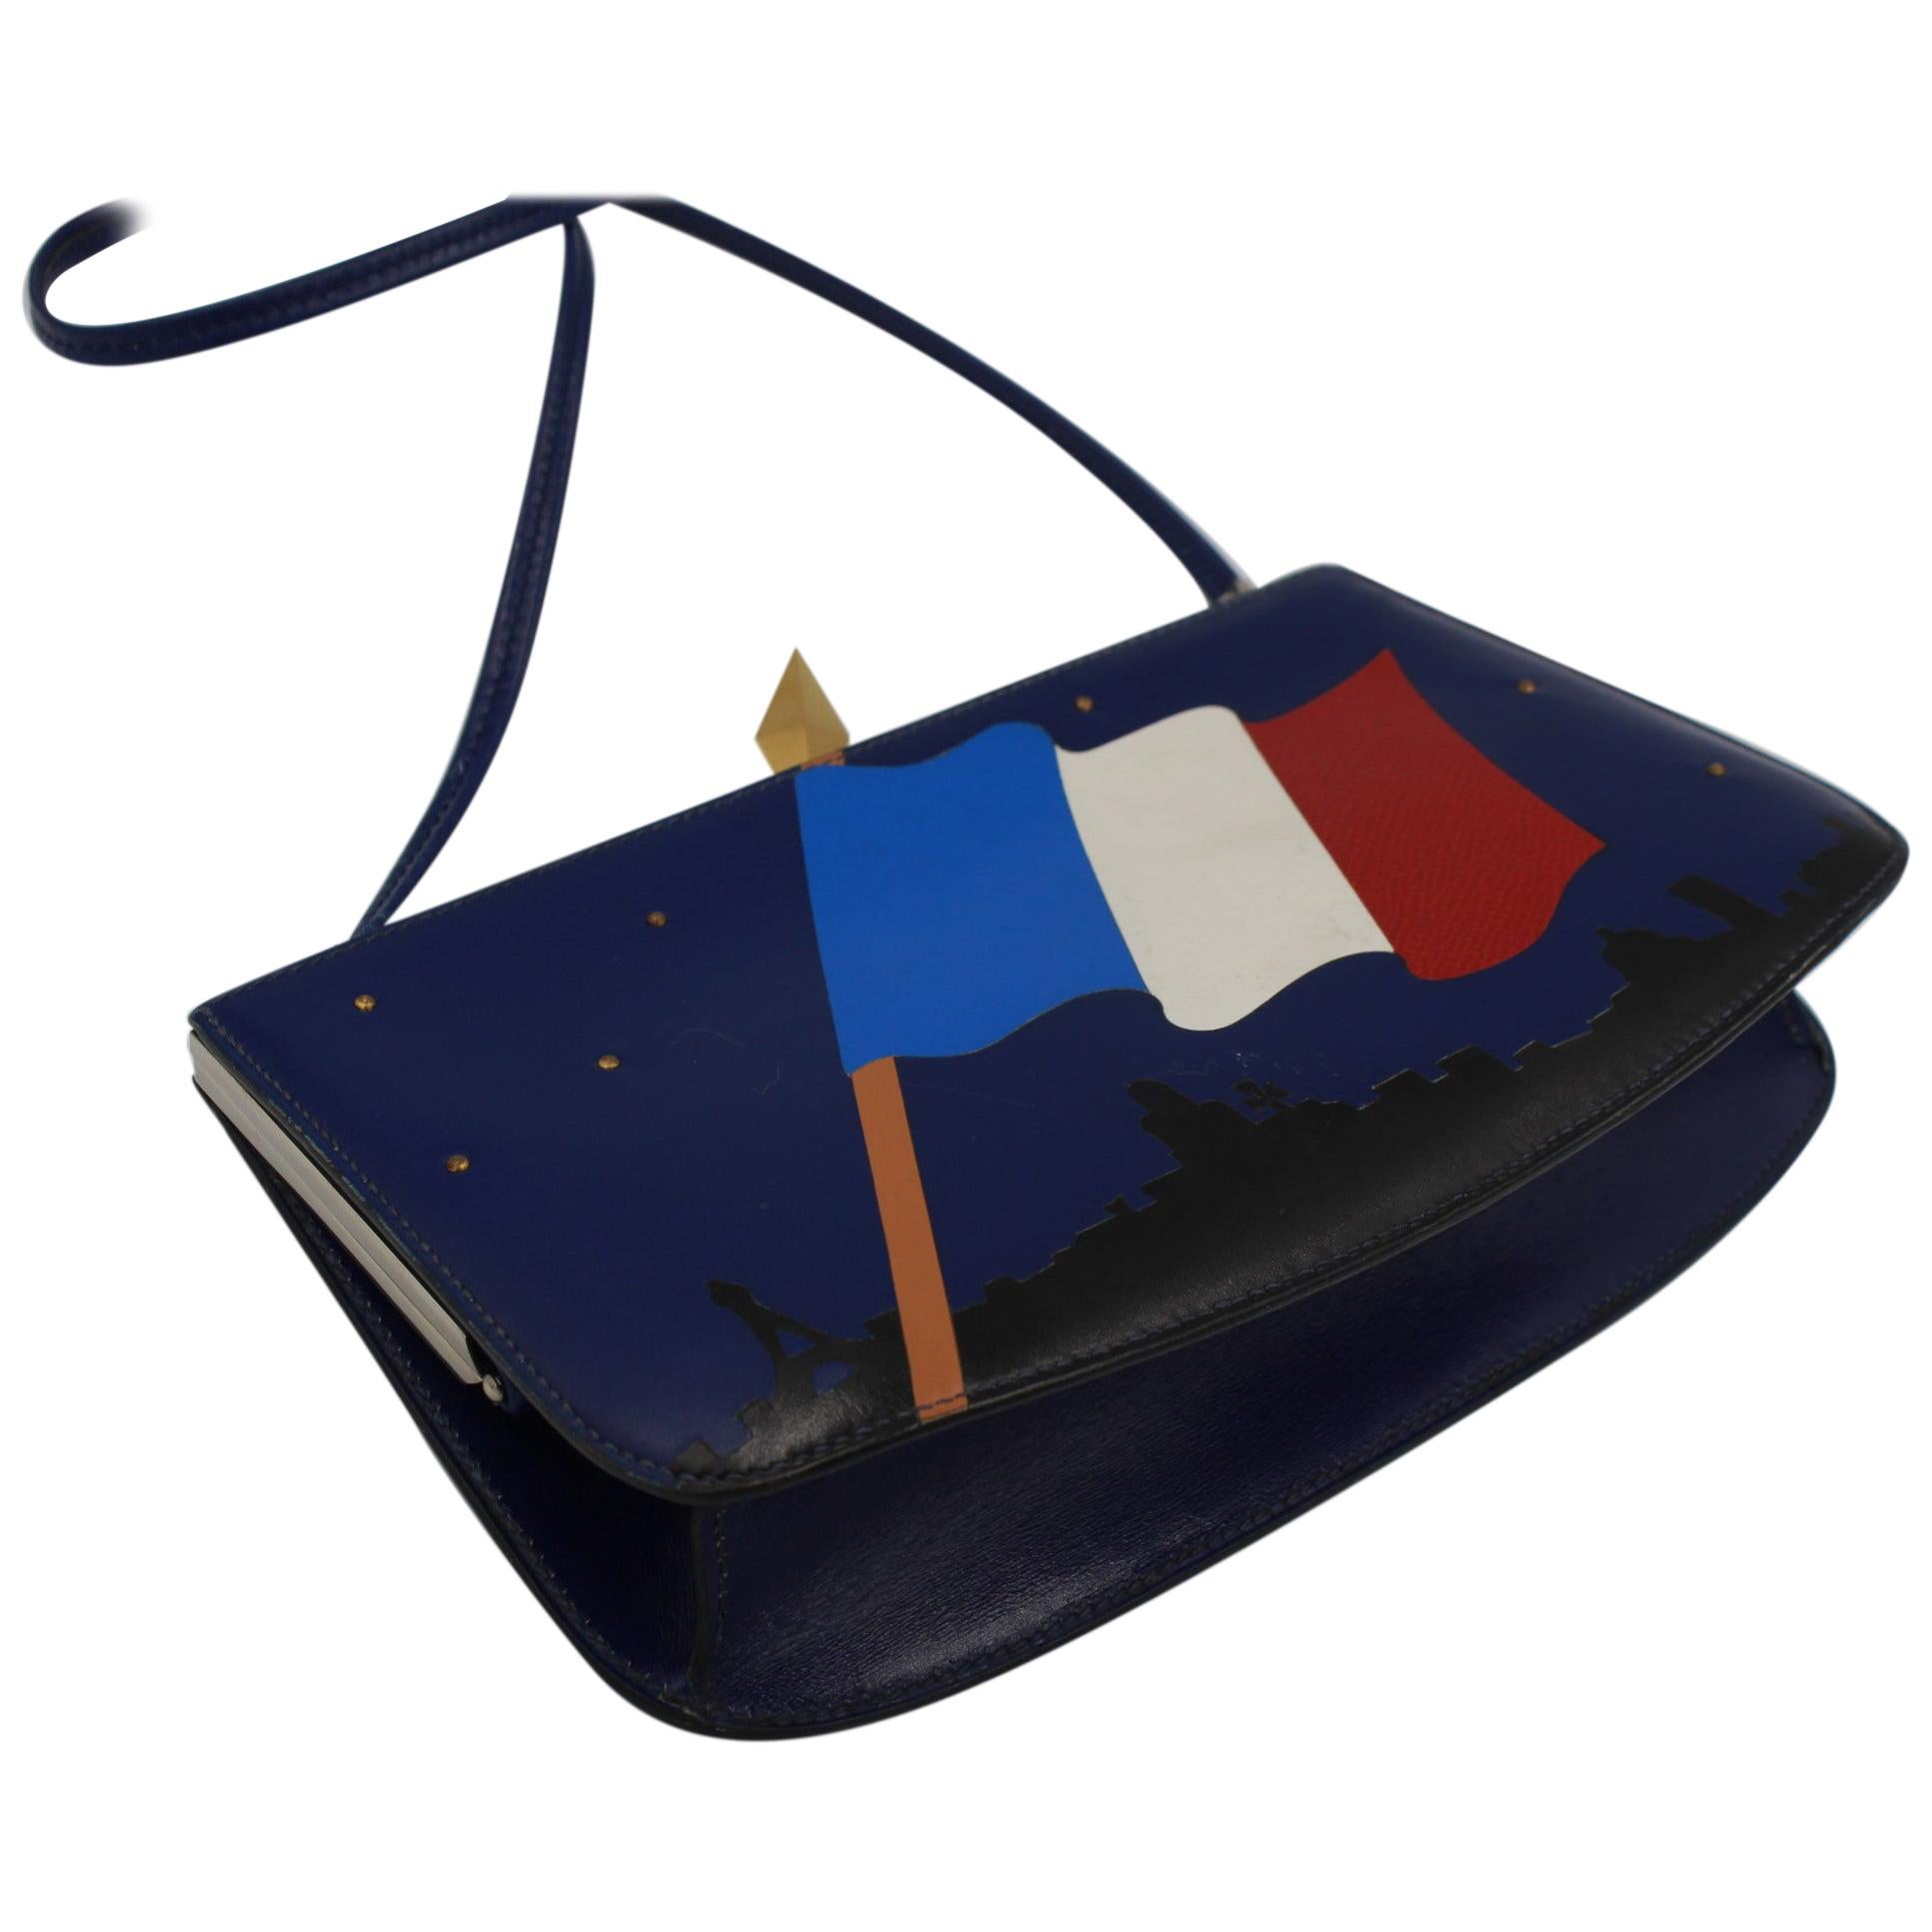 Hermès Sac à Malice in blue leather, with the French flag in leather patchwork